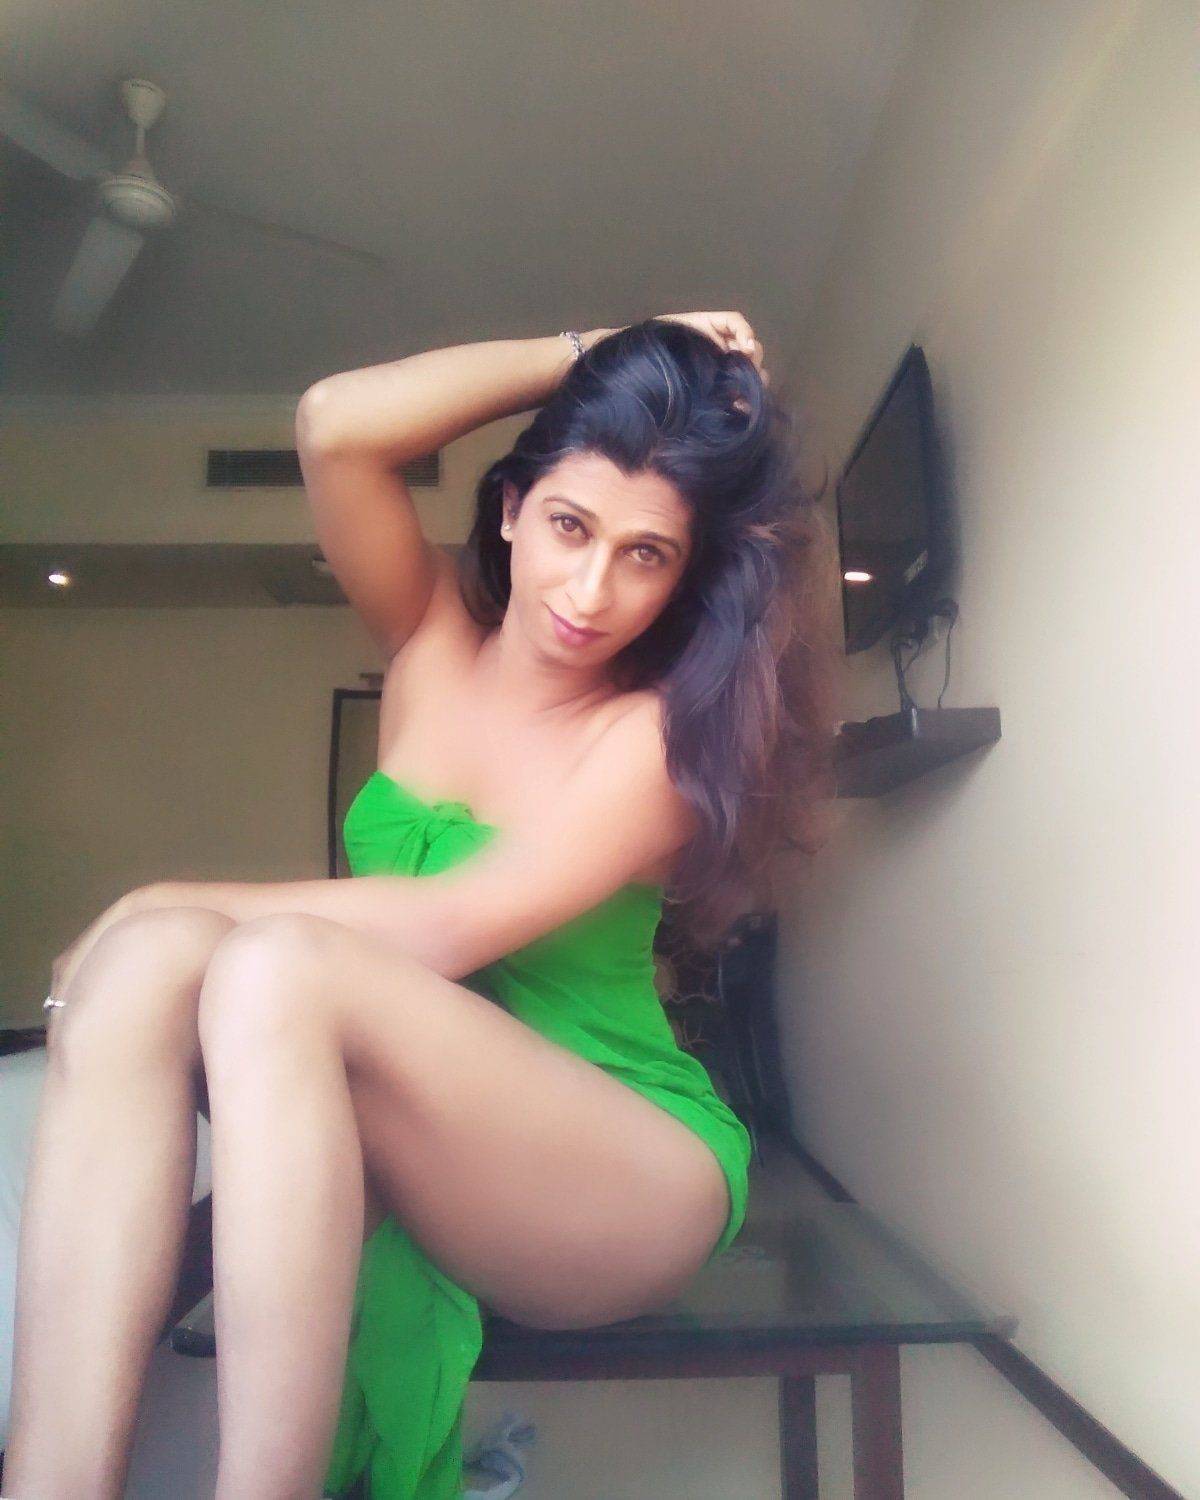 best of Shemale hd sexy indian escort pic nude